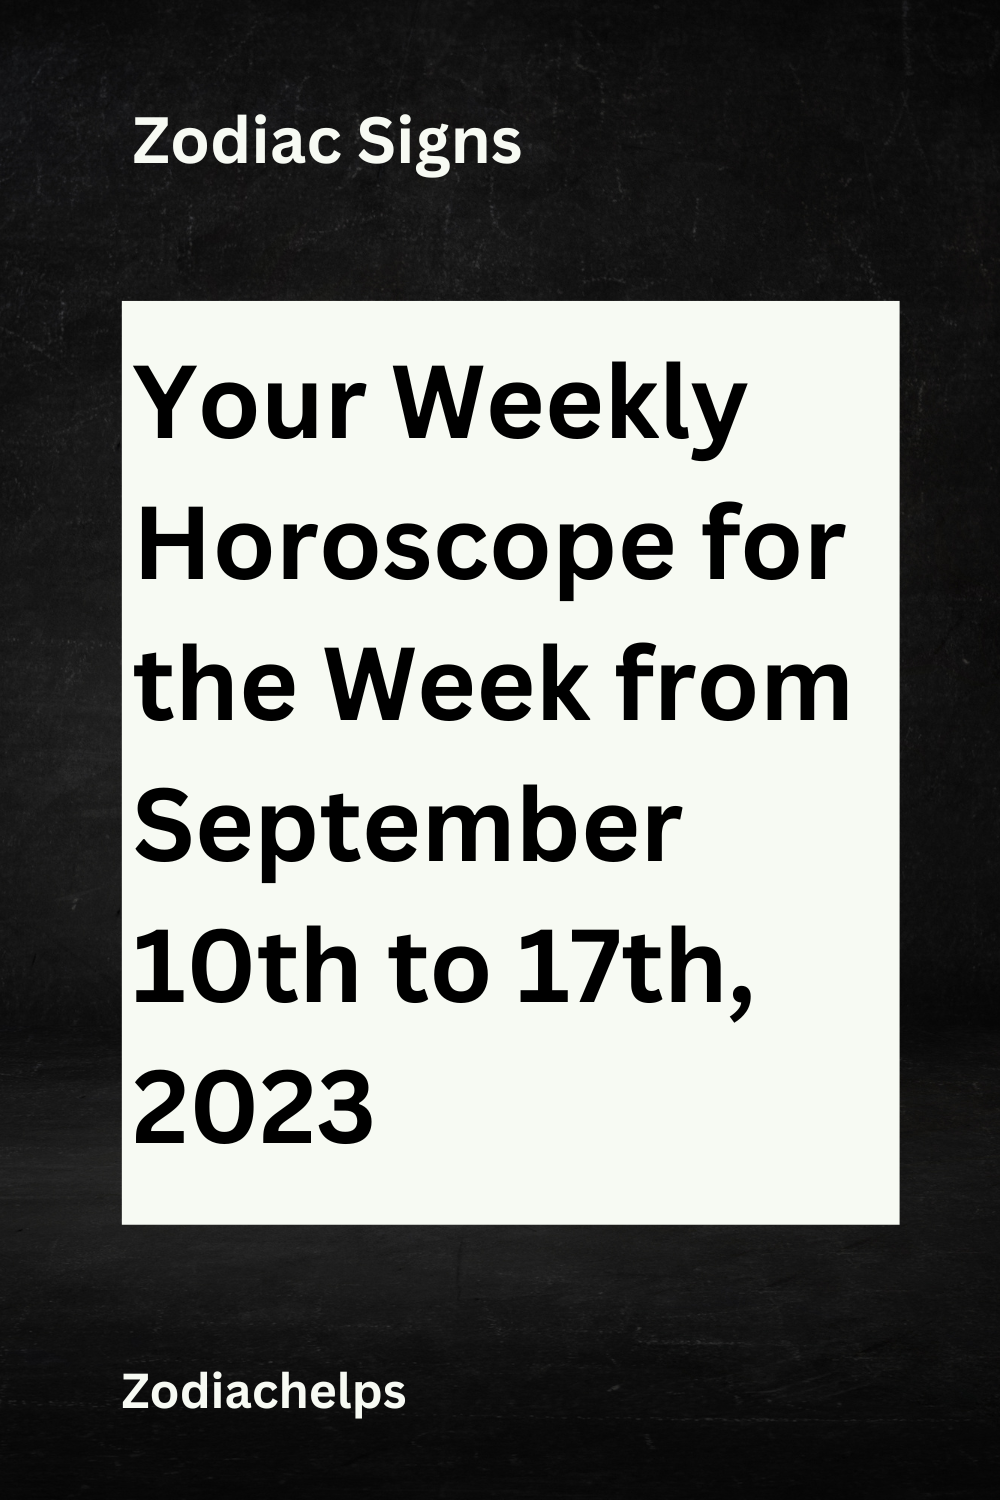 Your Weekly Horoscope for the Week from September 10th to 17th, 2023